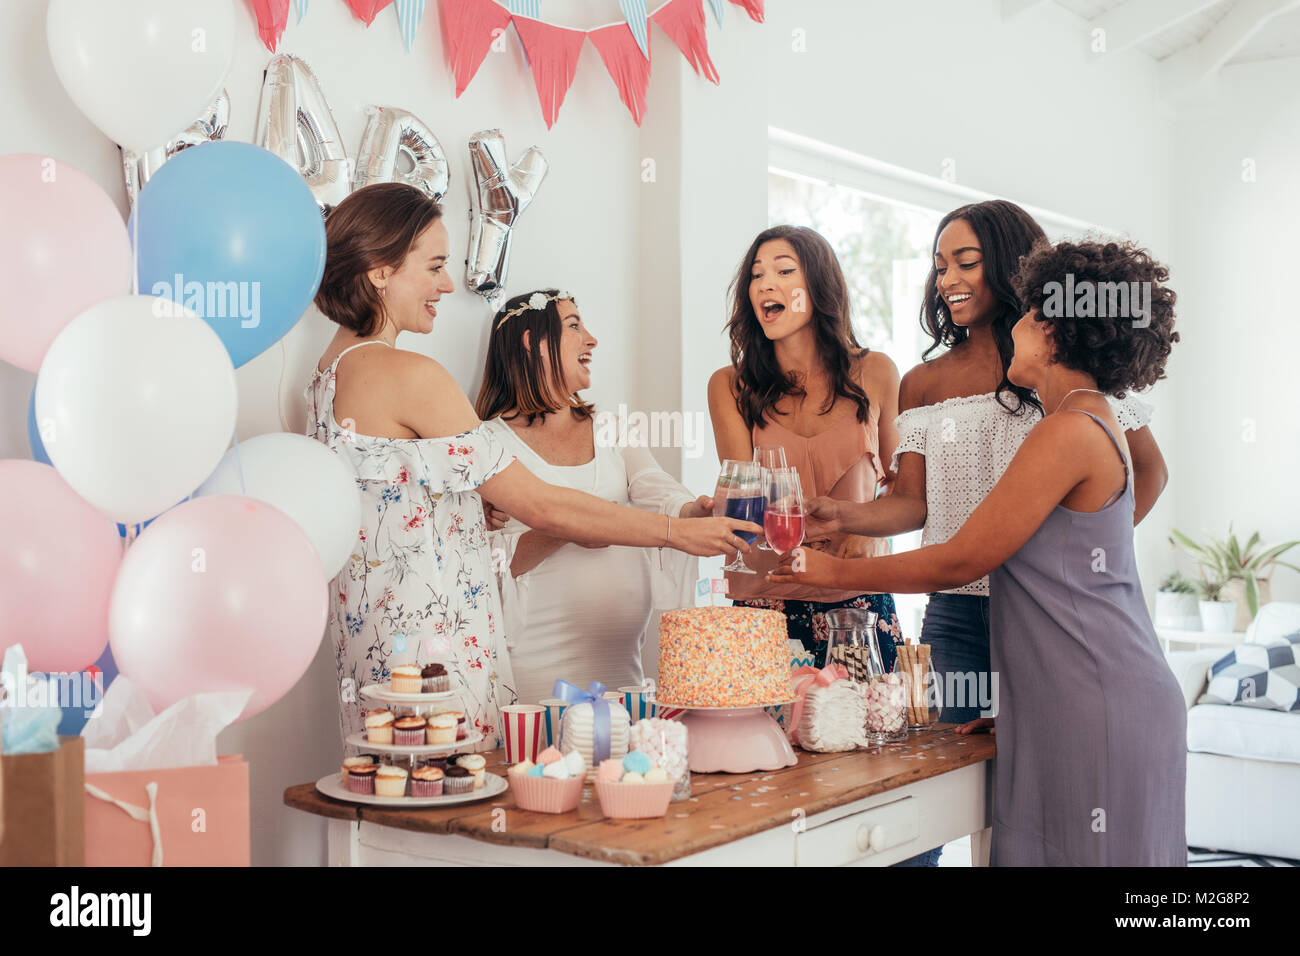 Women Toasting With Juices At Baby Shower Party Group Of Friends At